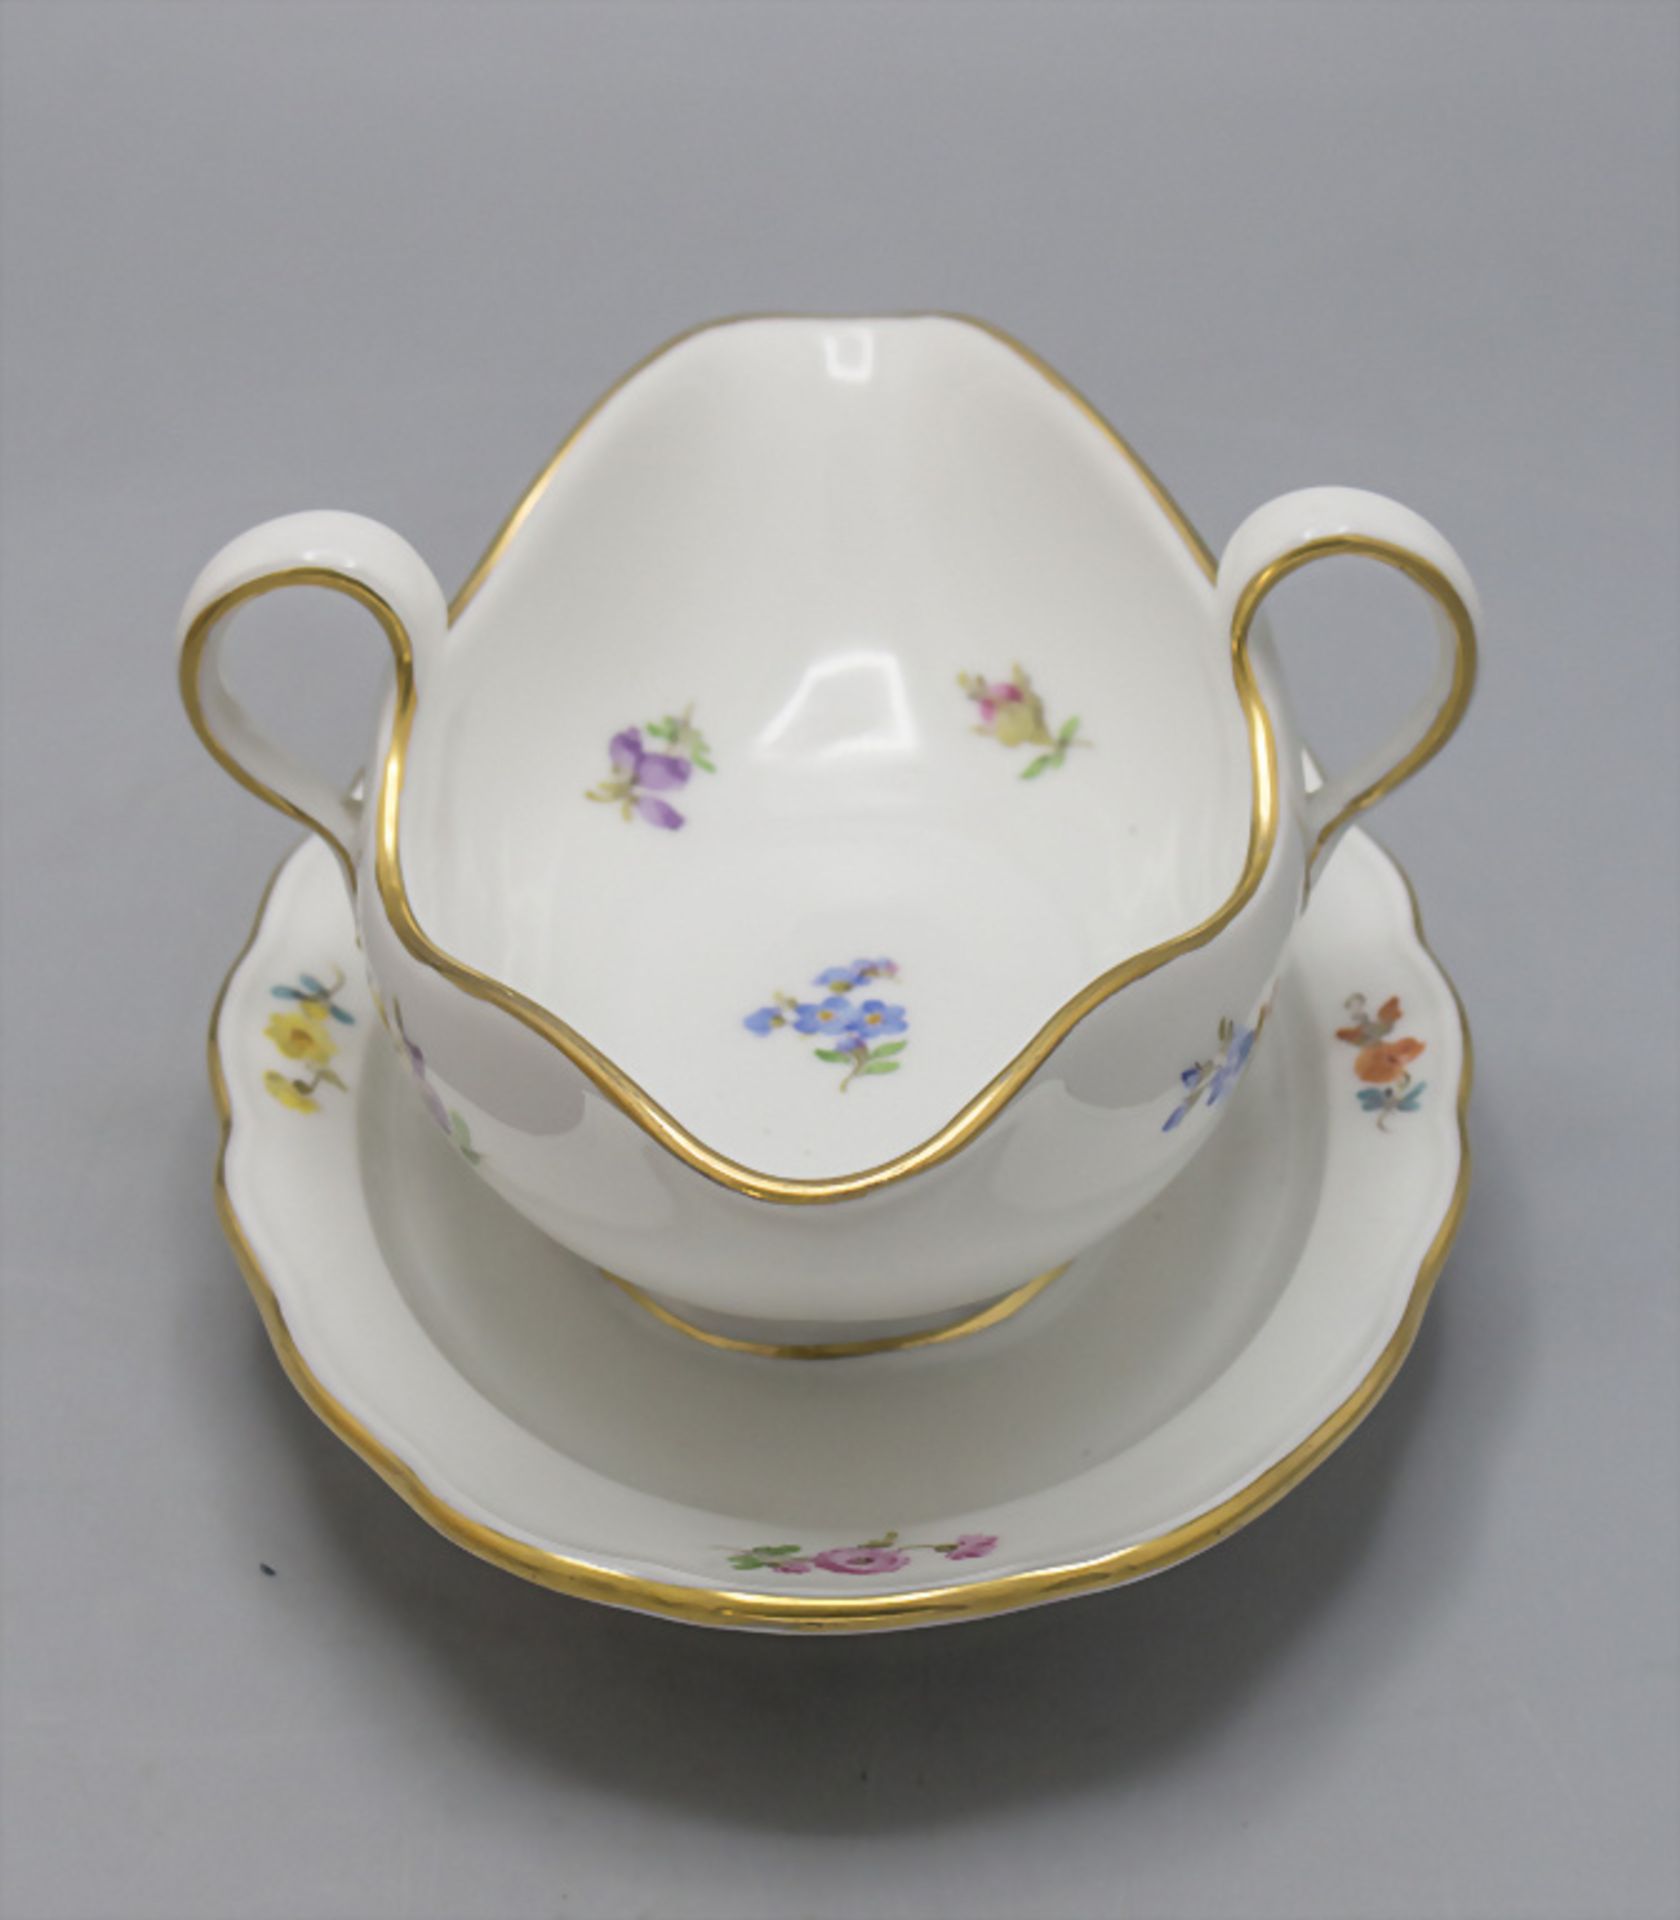 Sauciere mit Streublumen / A sauce boat with scattered flowers, Meissen, wohl 20. Jh. - Image 4 of 5